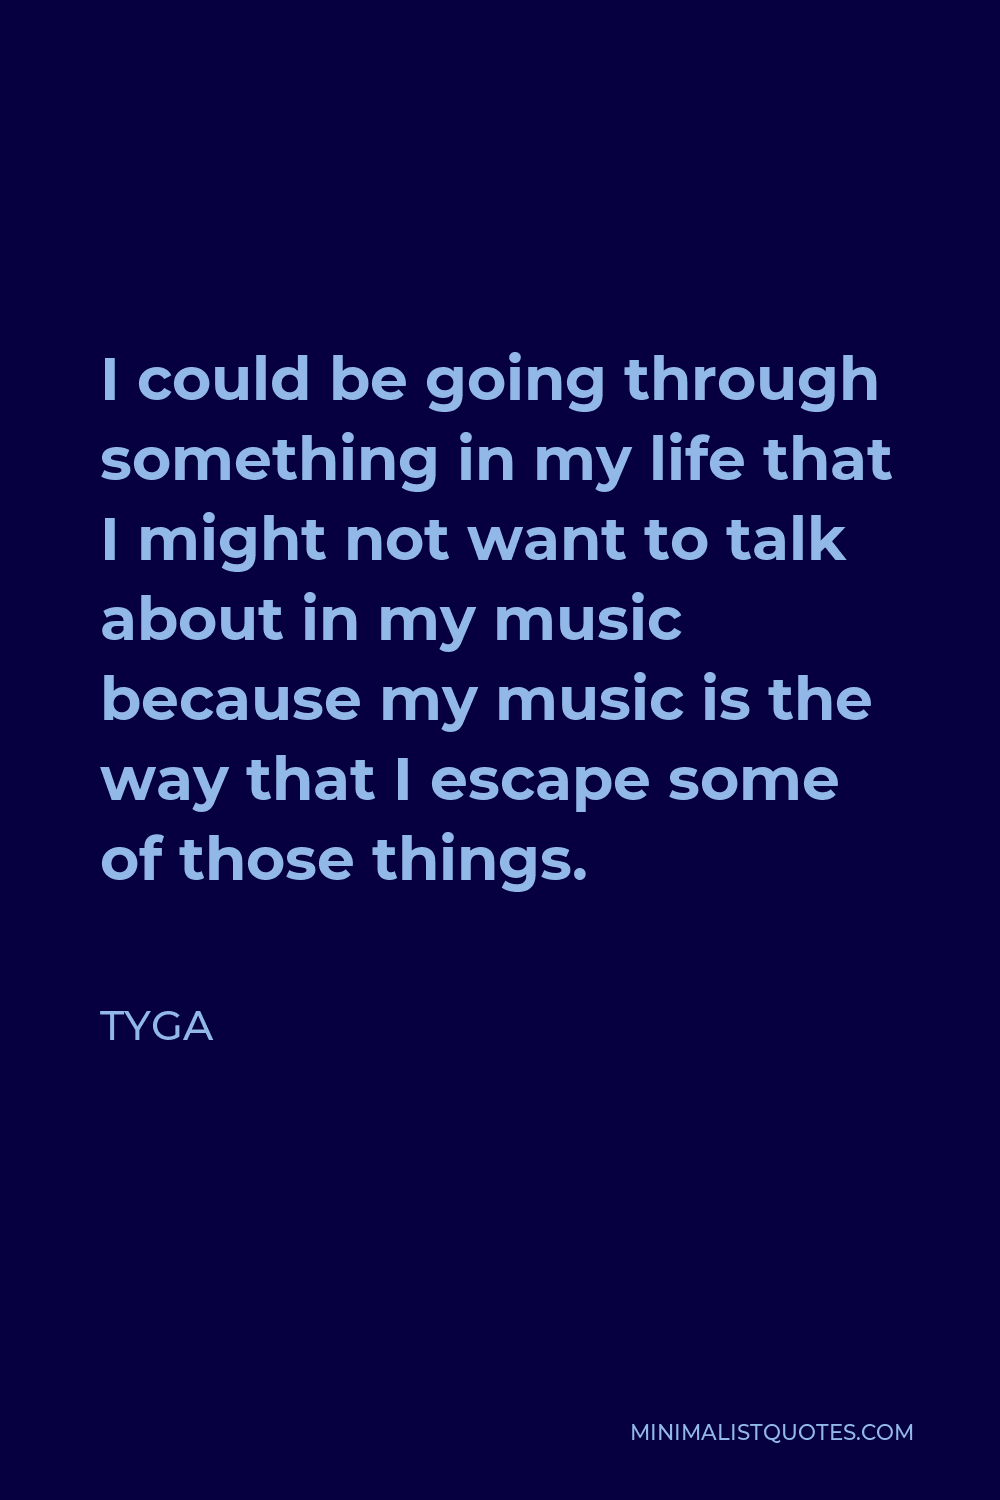 Tyga Quote - I could be going through something in my life that I might not want to talk about in my music because my music is the way that I escape some of those things.